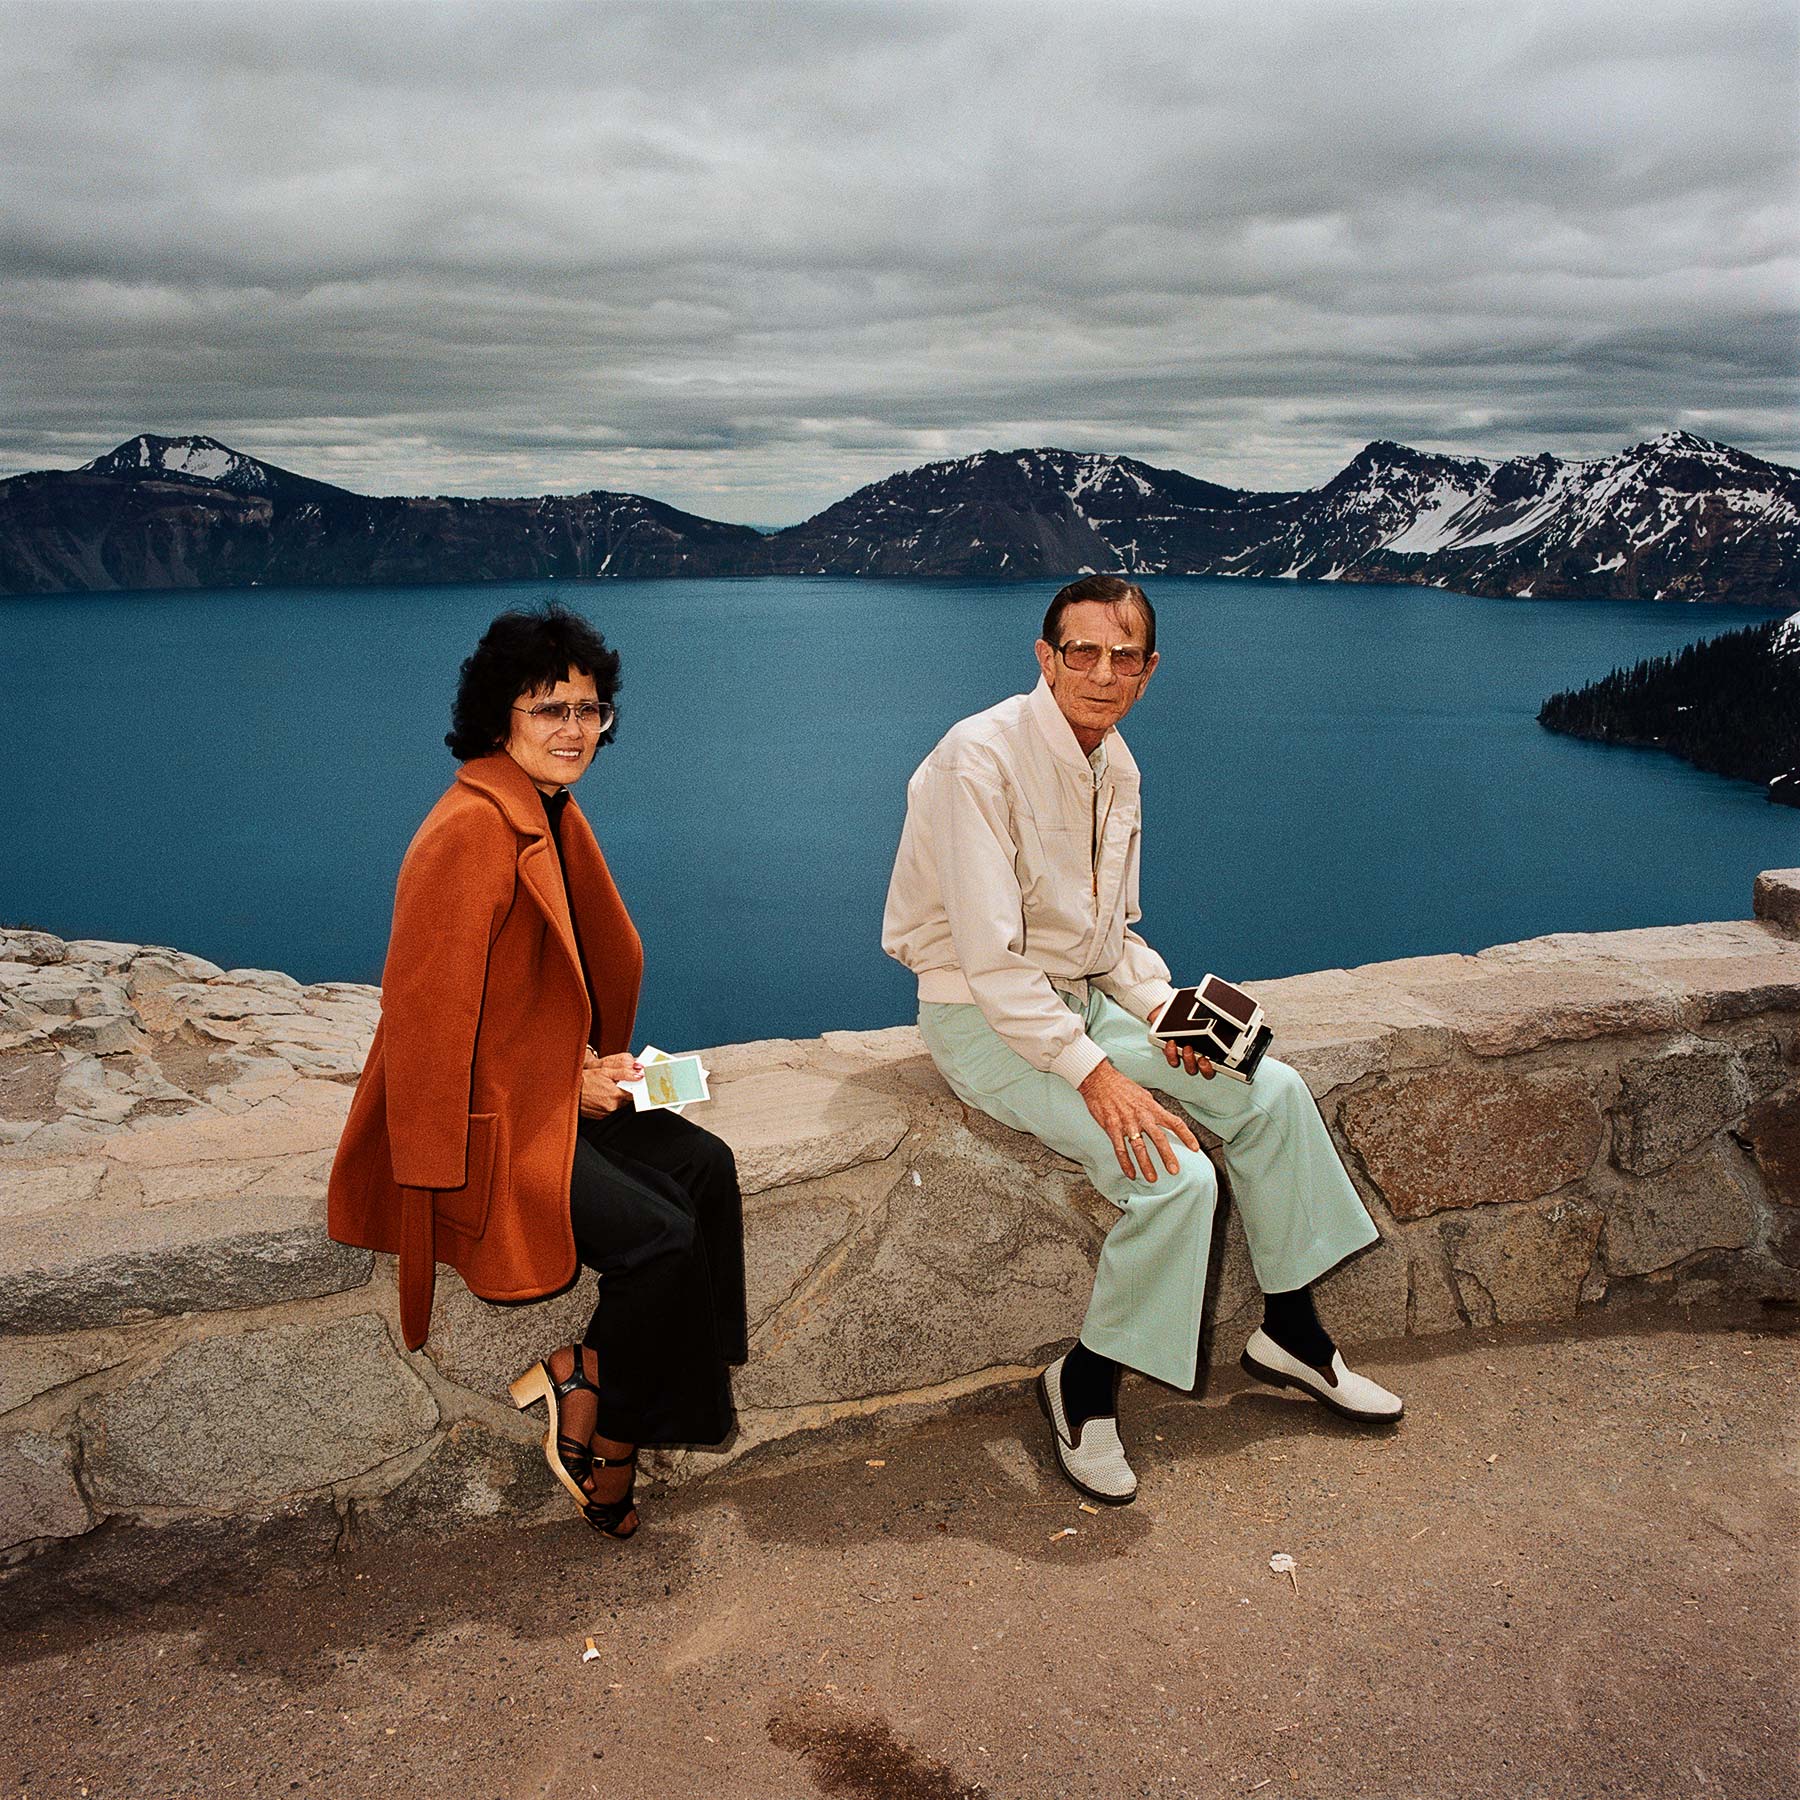 Couple Taking Polaroids, Crater Lake National Park, OR 1980 - Sightseer Series - Photo by Roger Minick